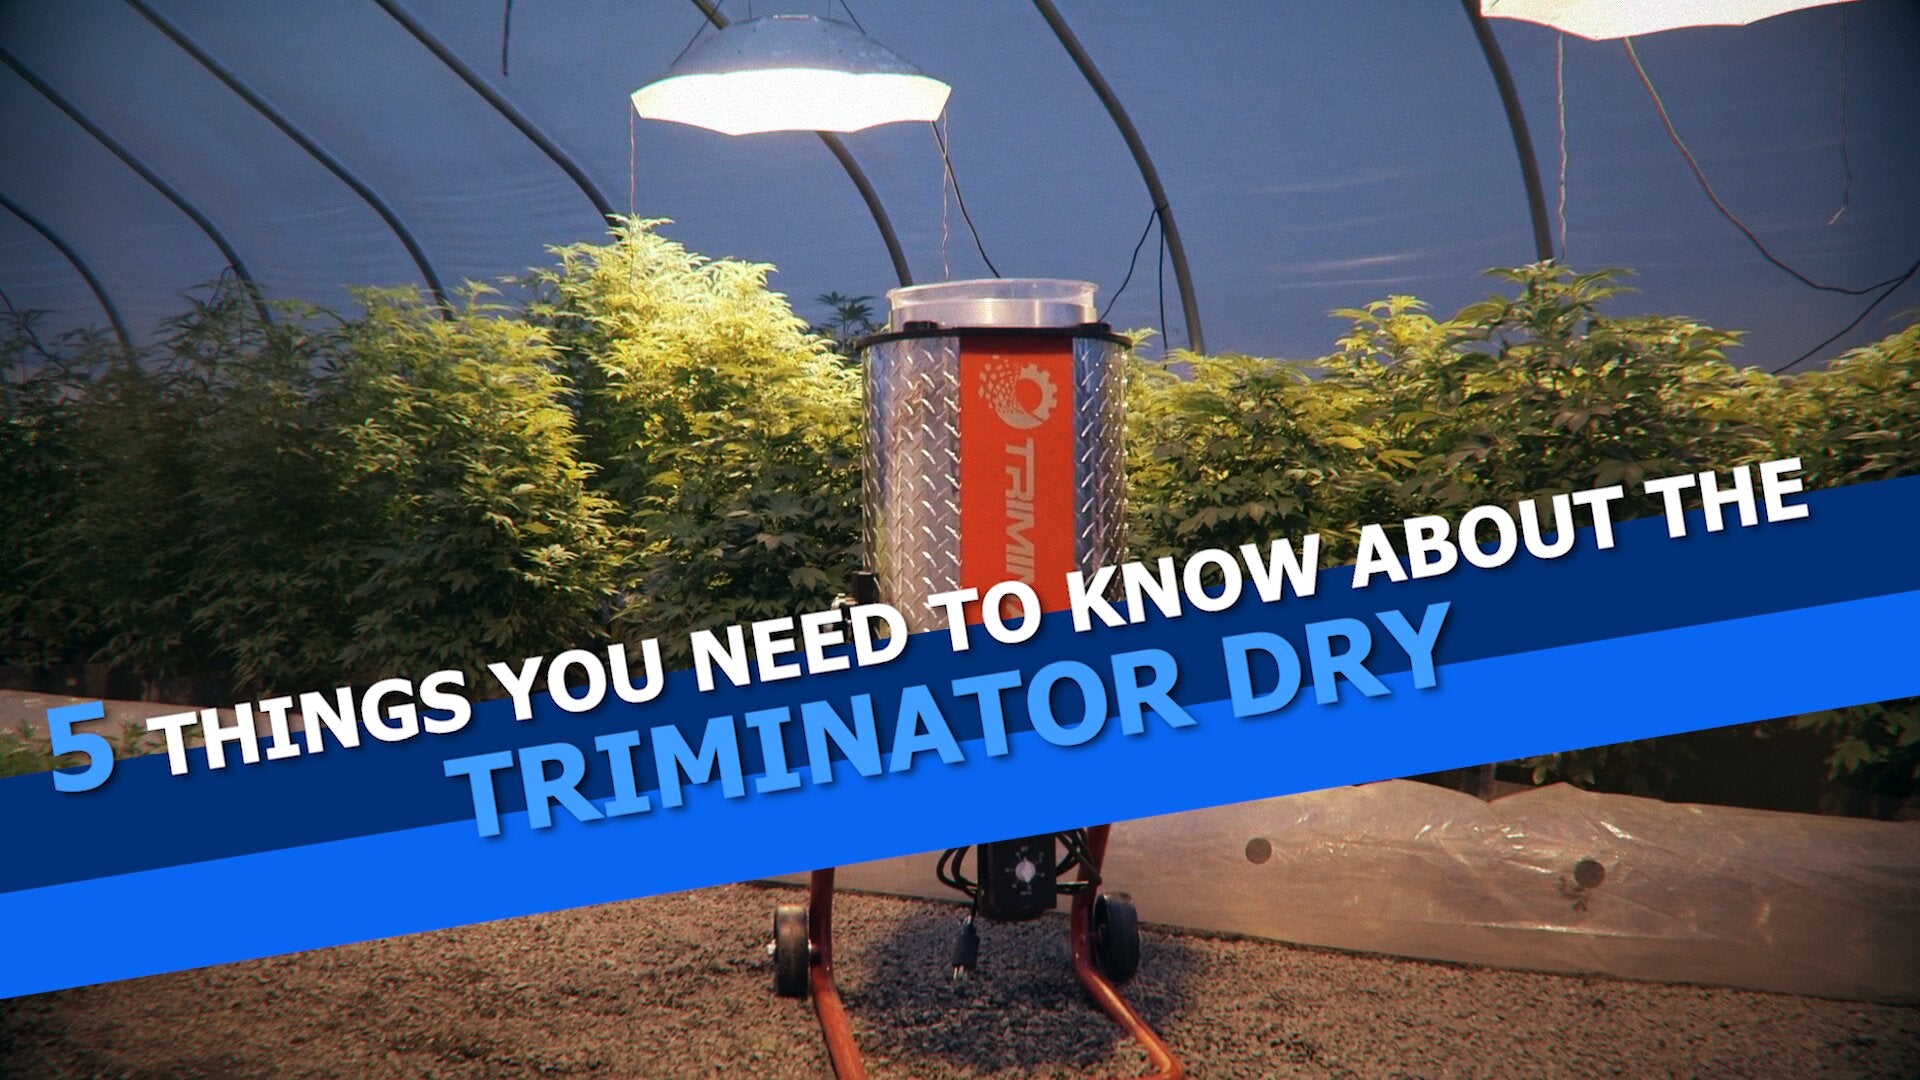 5 Things You Need To Know About The Triminator Dry Automatic Dry Bud Trimmer